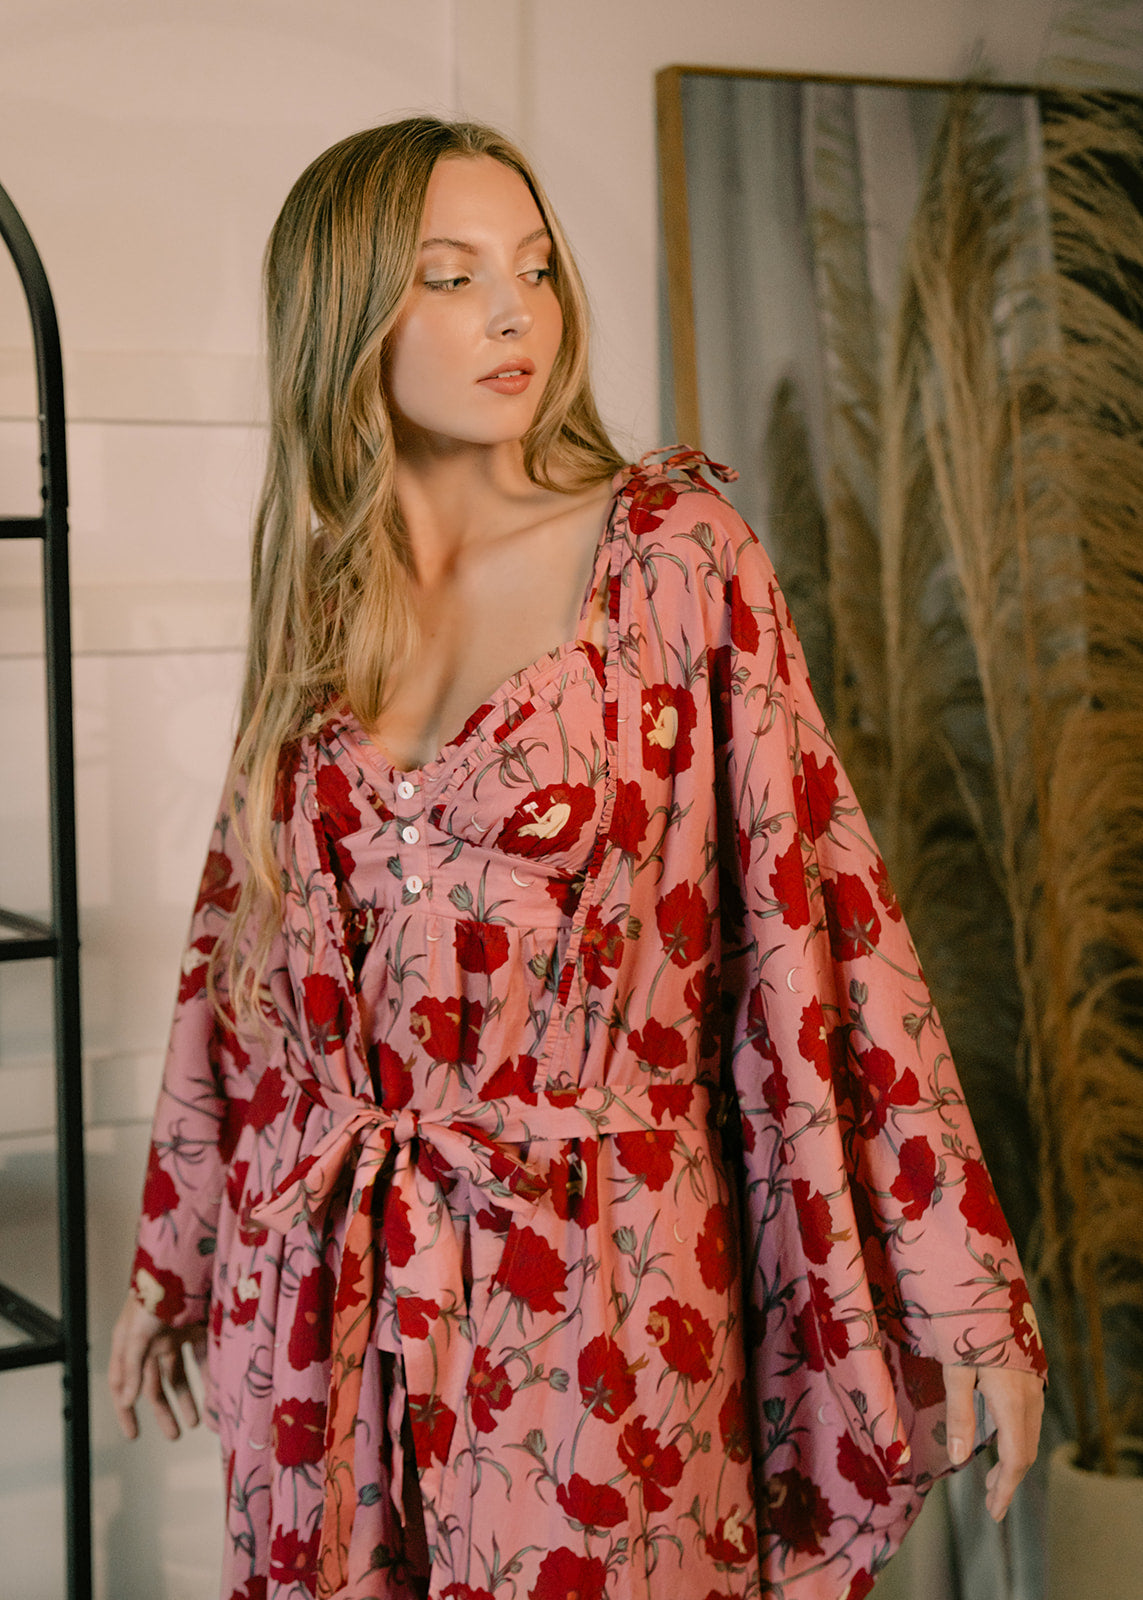 Till Blush Of Night luxury loungewear / pyjama long robe style made out of lightweight Tencel eco-friendly fabric in pink and red colorway 